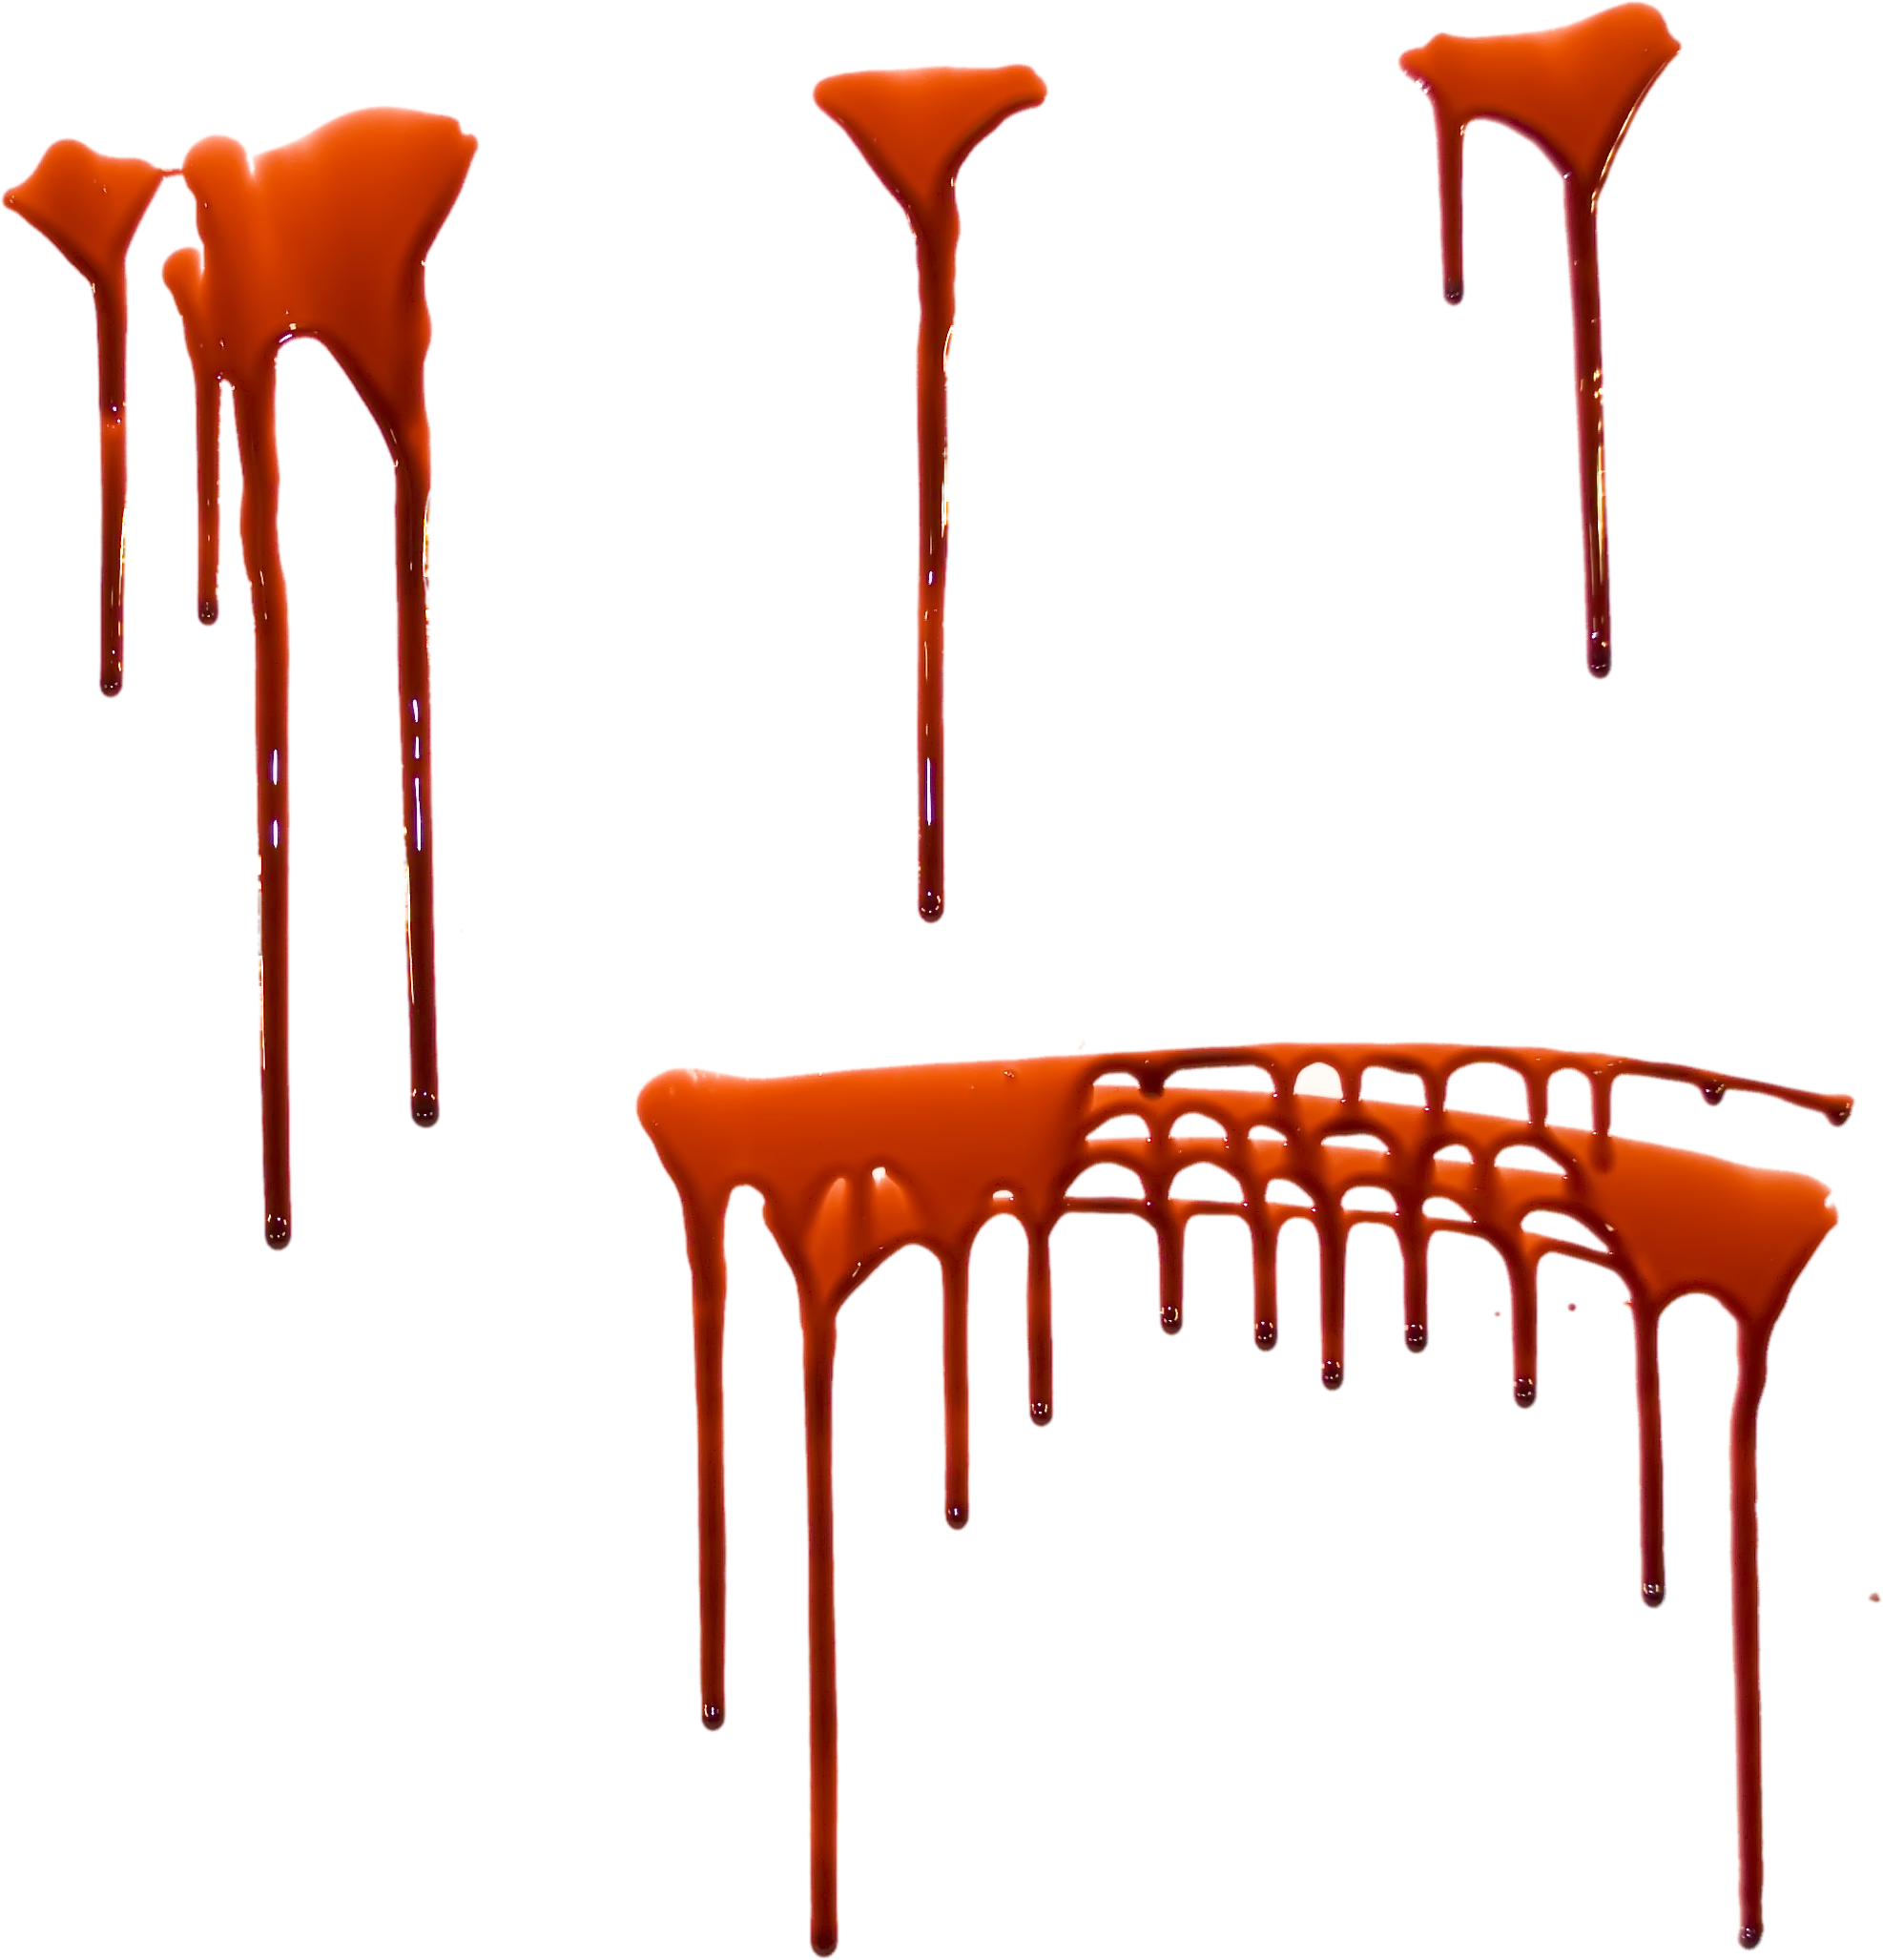 Realistic blood dripping png. Images free download splashes